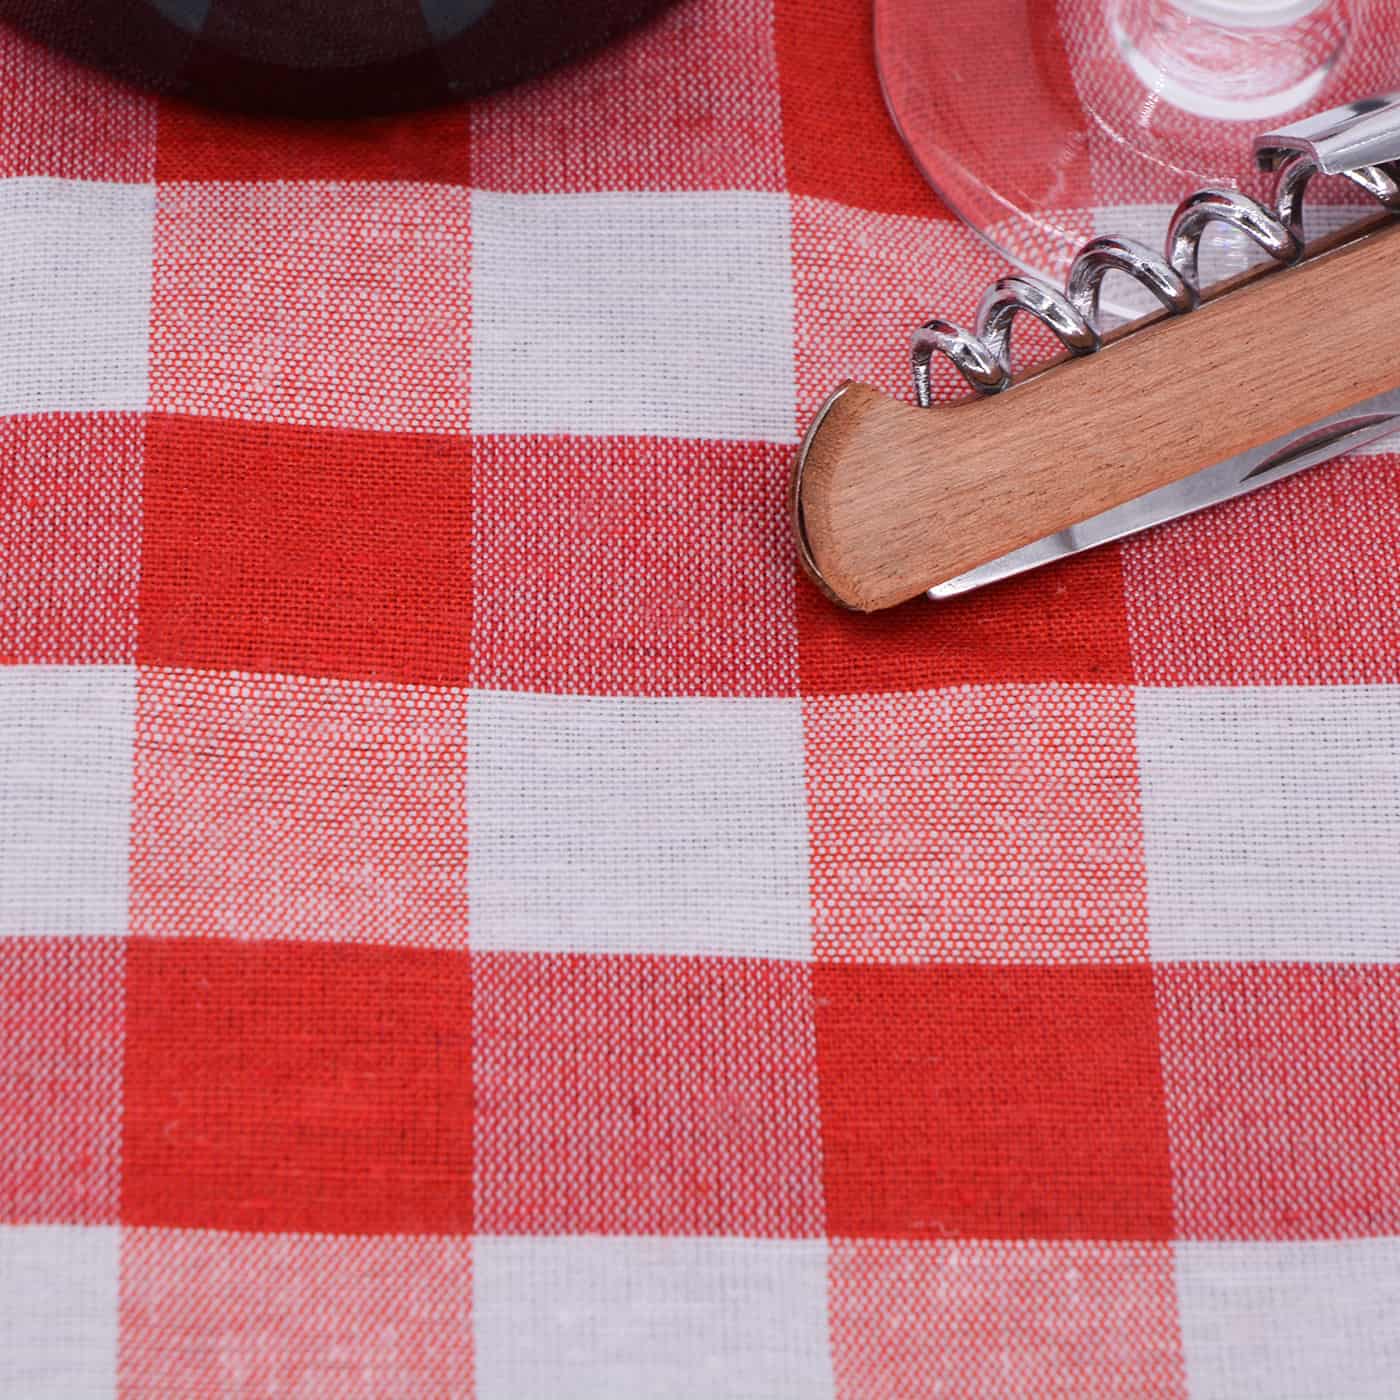 Waterproof picnic blanket red and white